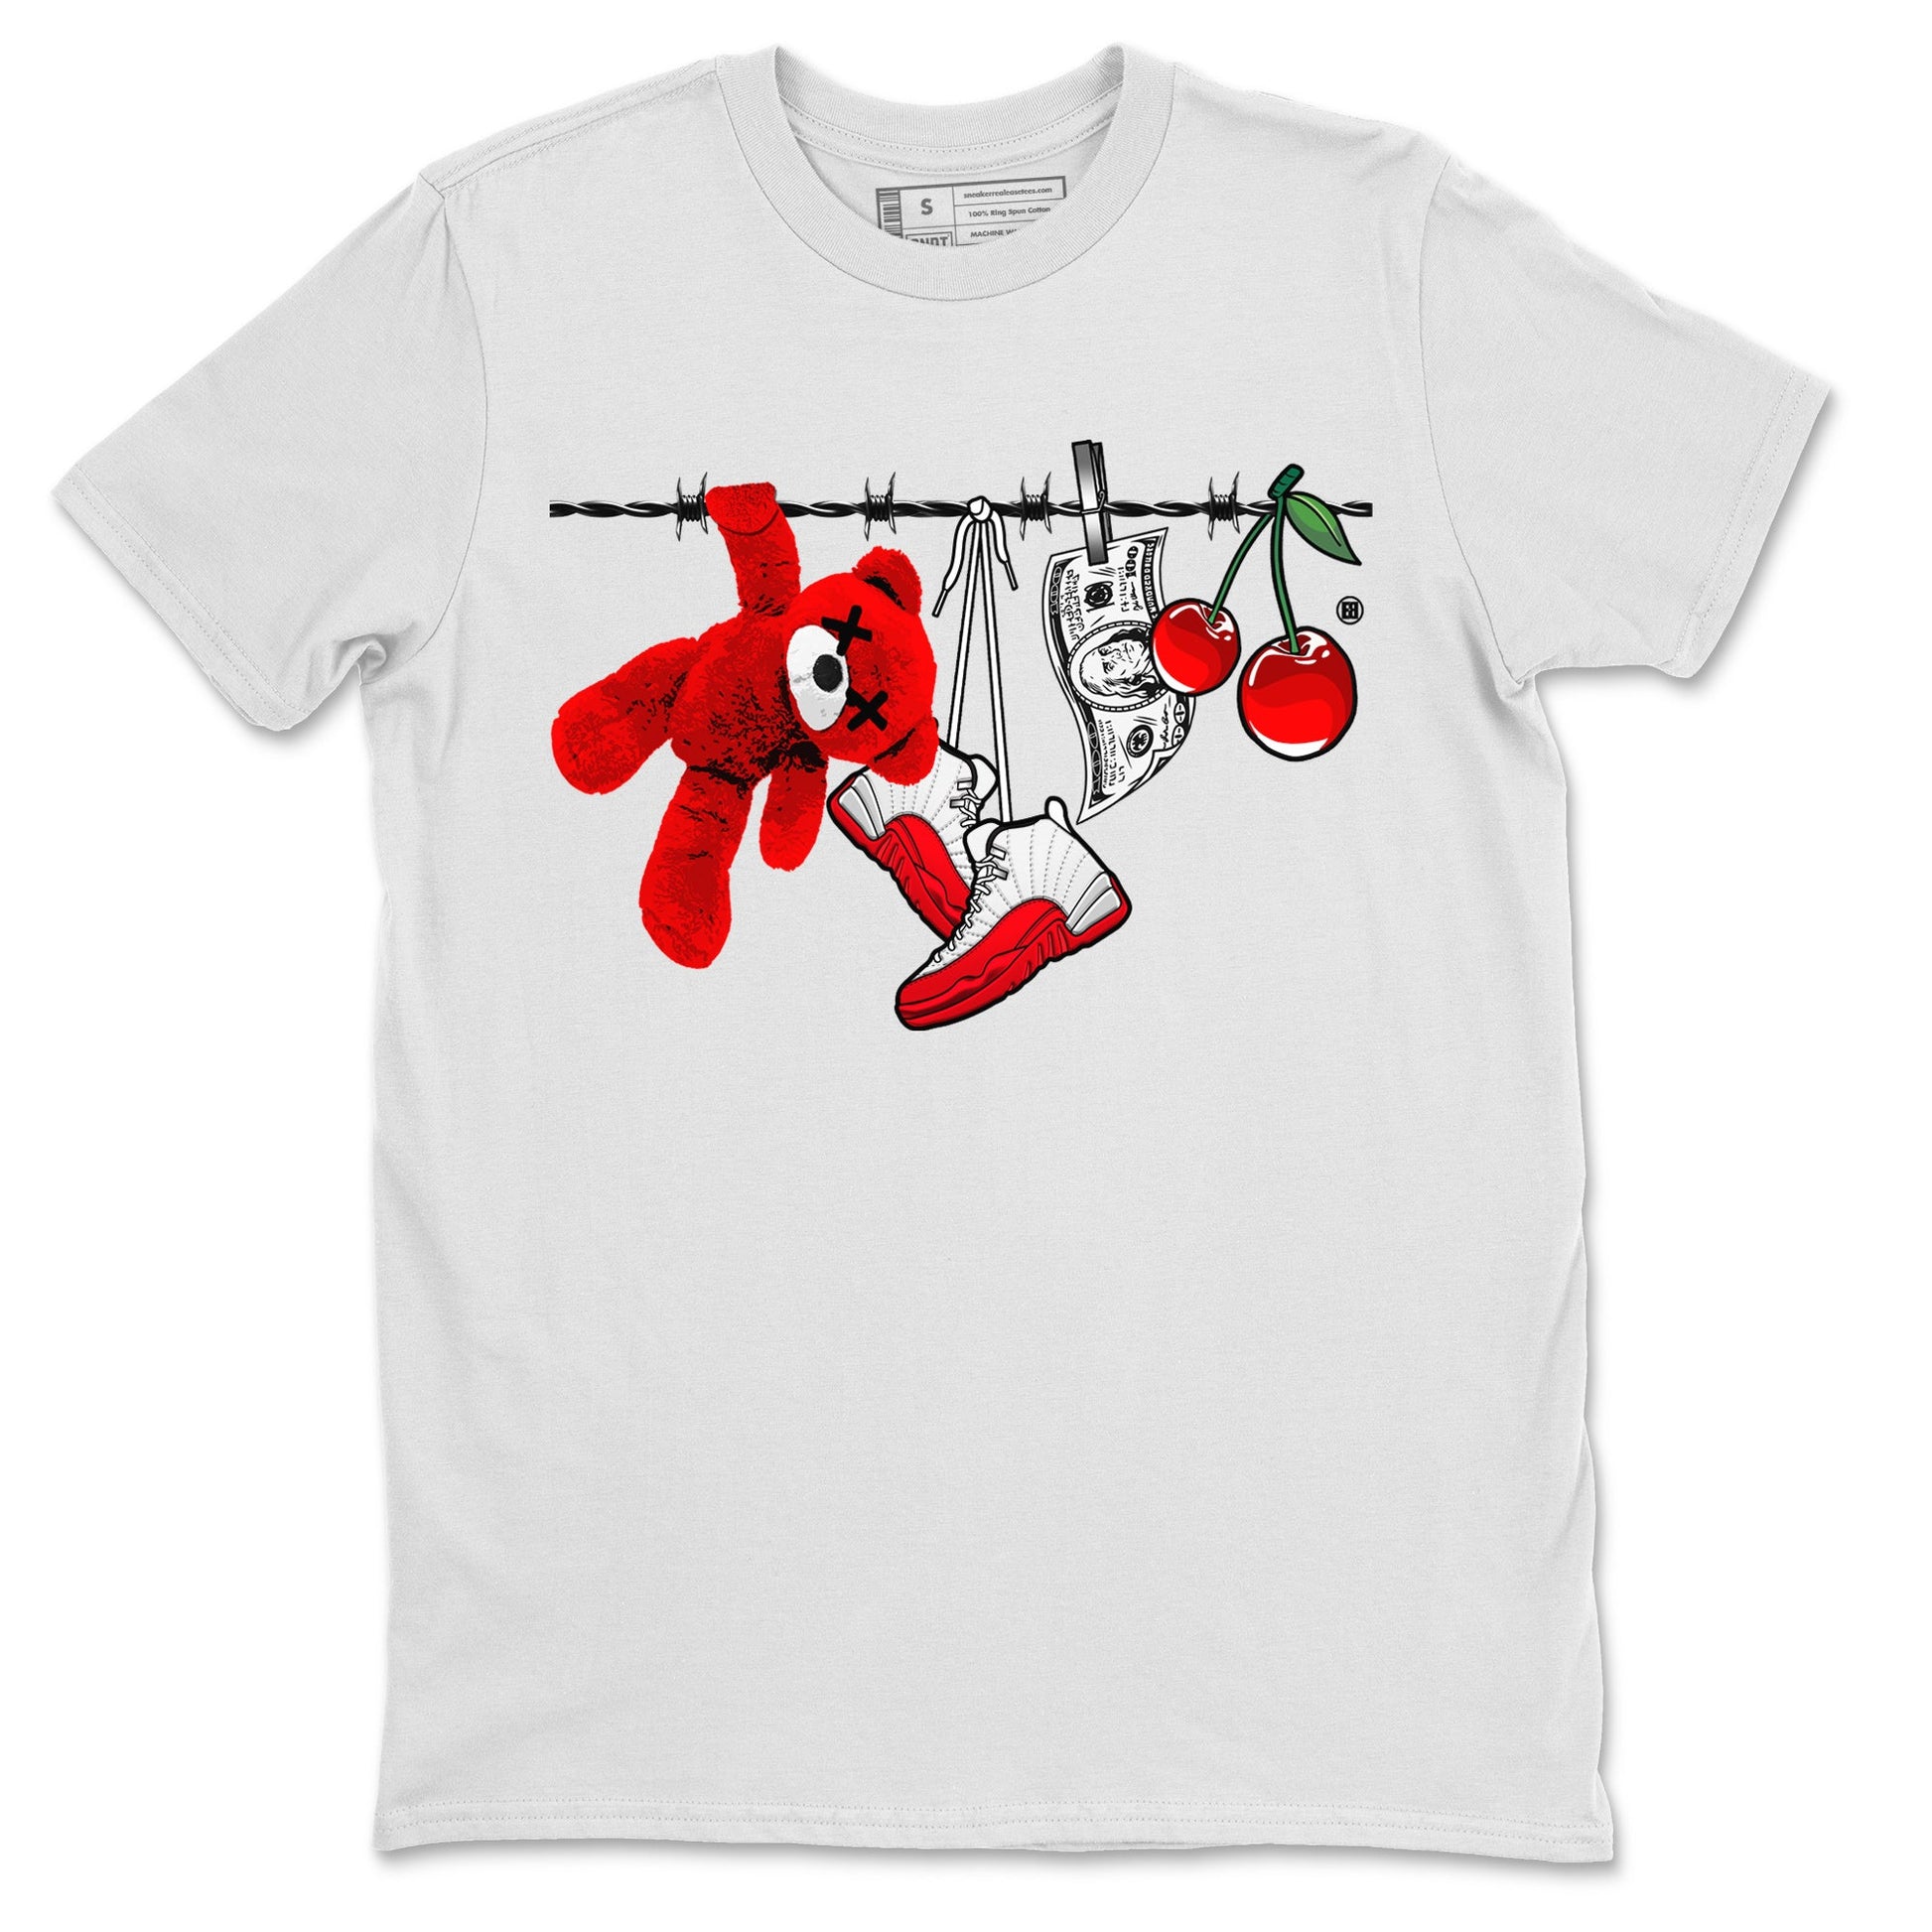 12s Cherry Sneaker Match Tees Clothesline Sneaker Tees Air Jordan 12 Cherry Sneaker Release Tees Unisex Shirts White 2